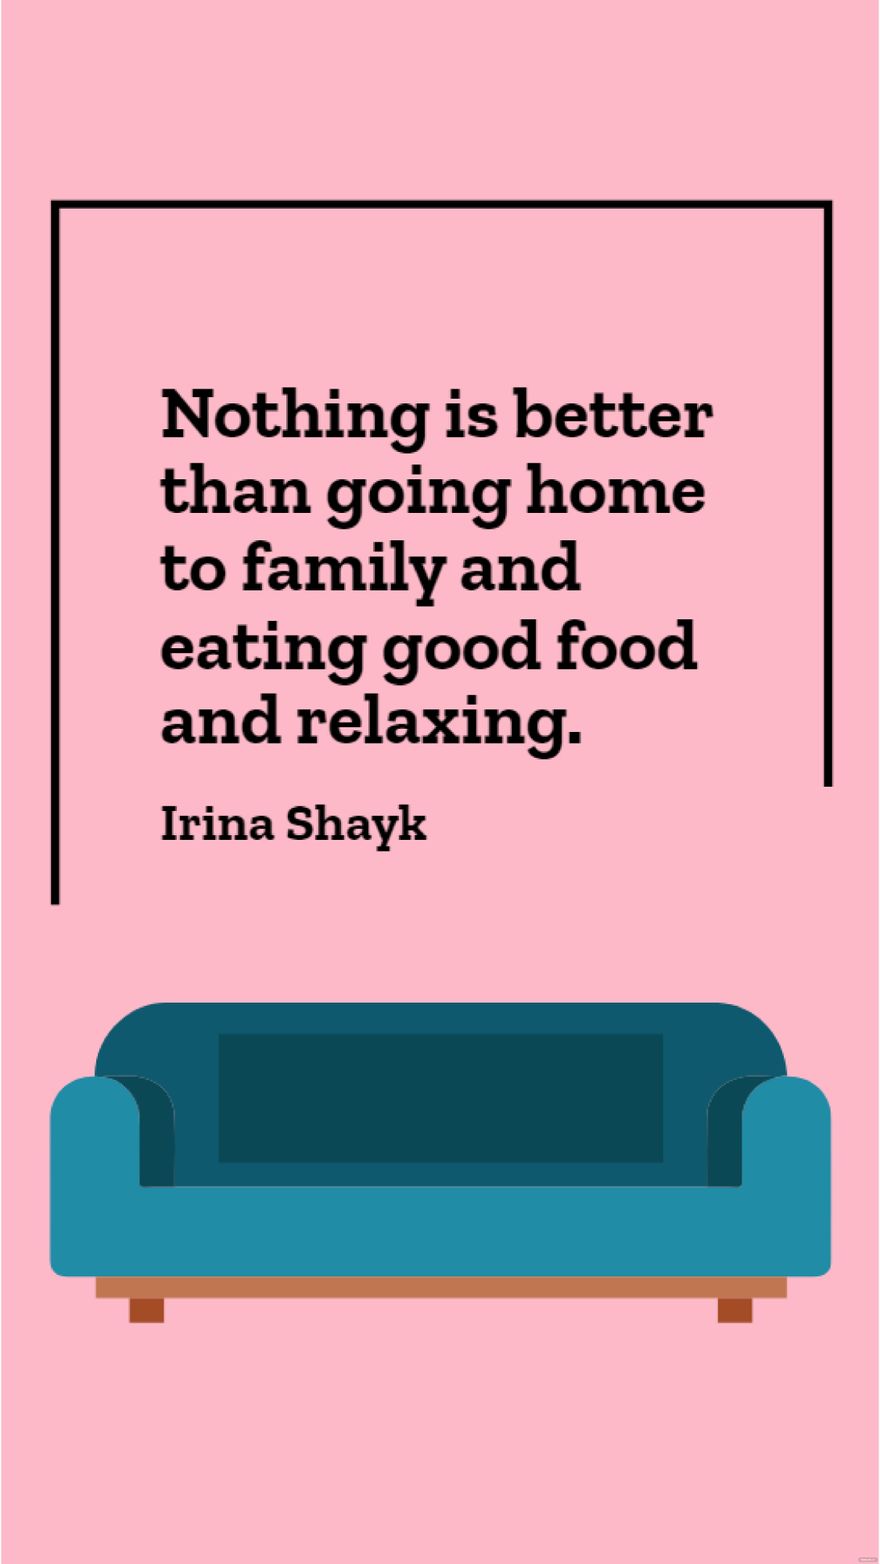 Irina Shayk - Nothing is better than going home to family and eating good food and relaxing.